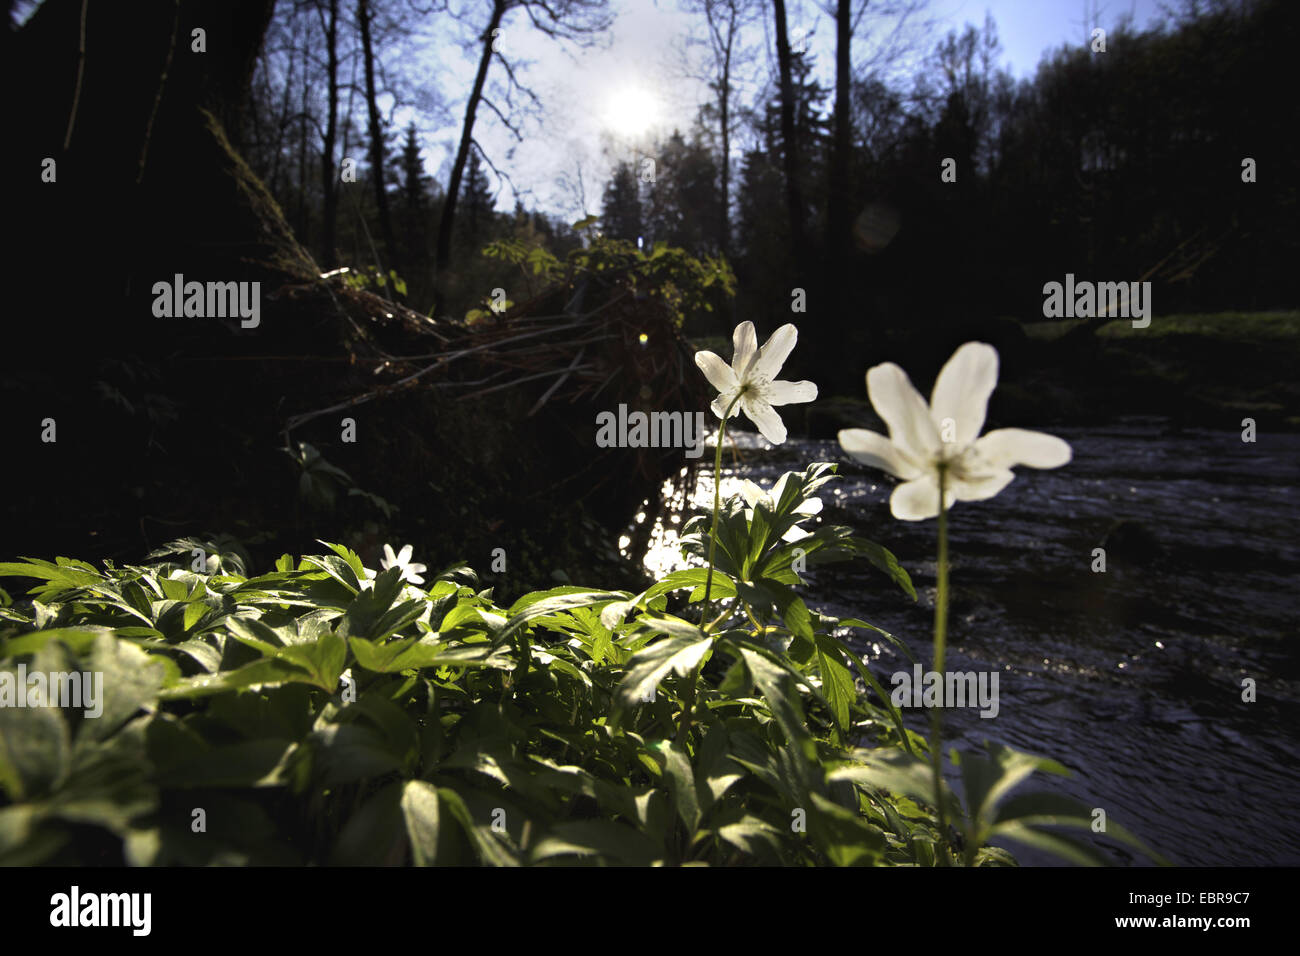 wood anemone (Anemone nemorosa), at a riverside in front of the rising sun, Germany, Saxony, Vogtland Stock Photo